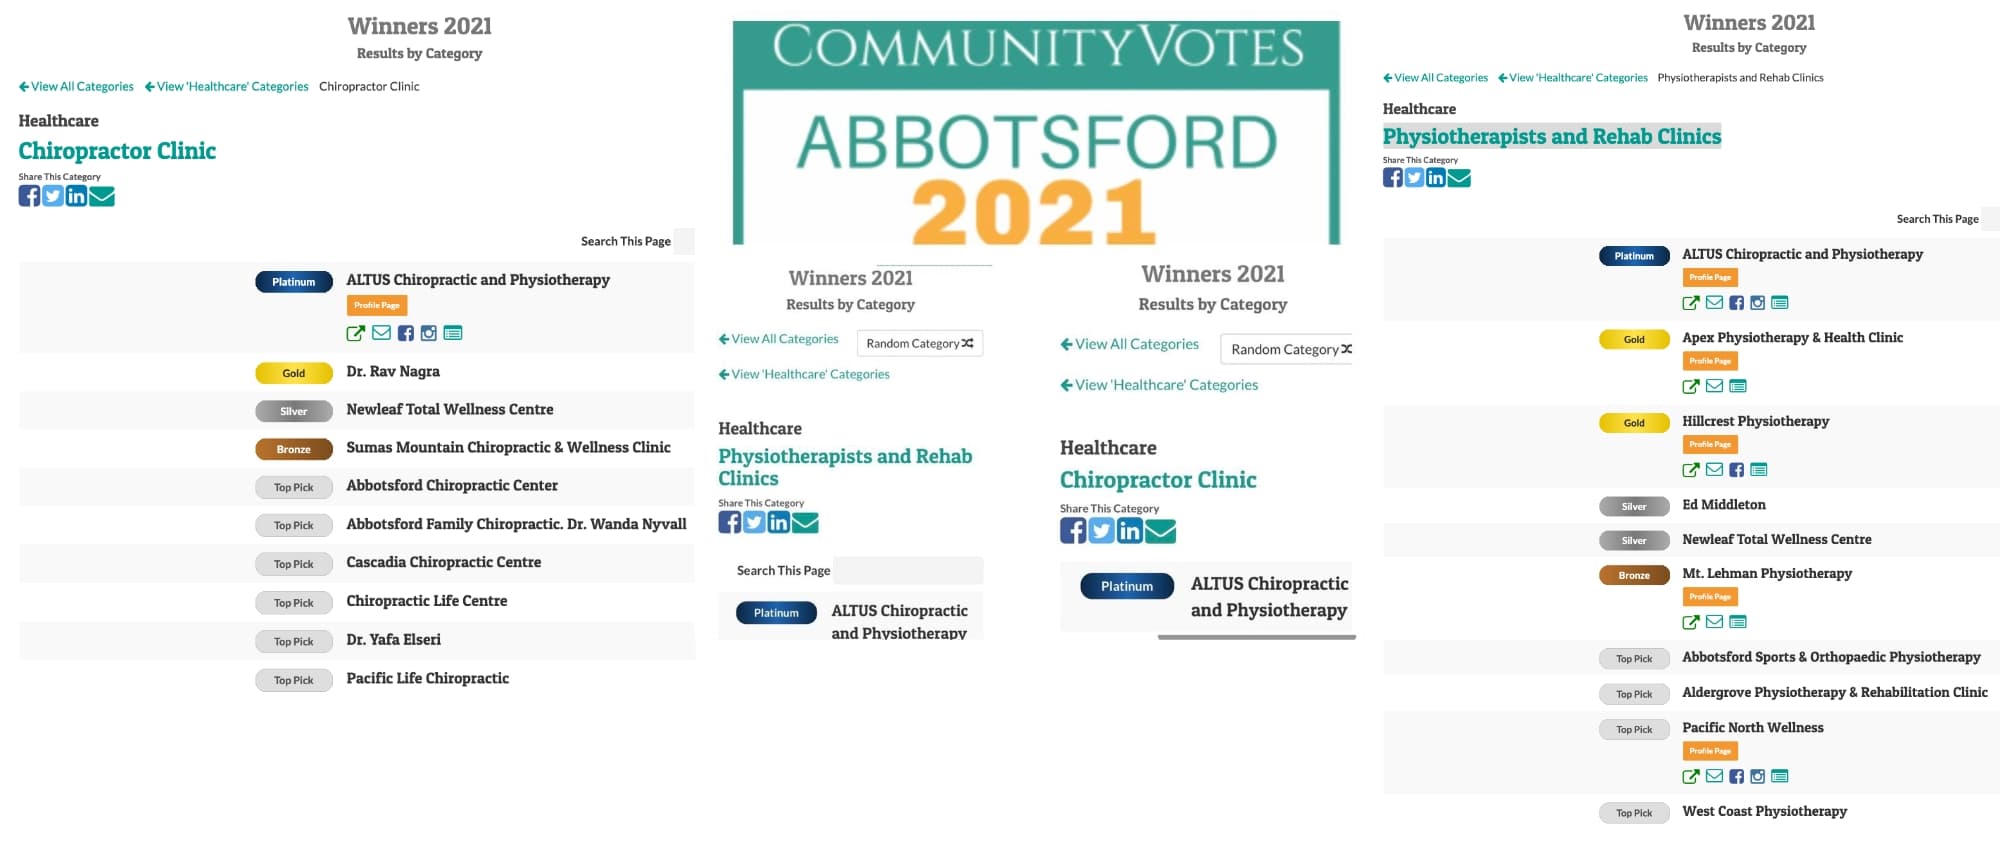 ALTUS Chiropractic and Physiotherapy Clinic in Abbotsford BC announced as Platinum winners for two categories, “Chiropractor Clinic” and “Physiotherapists and Rehab Clinic” in “CommunityVotes Abbotsford 2021”.